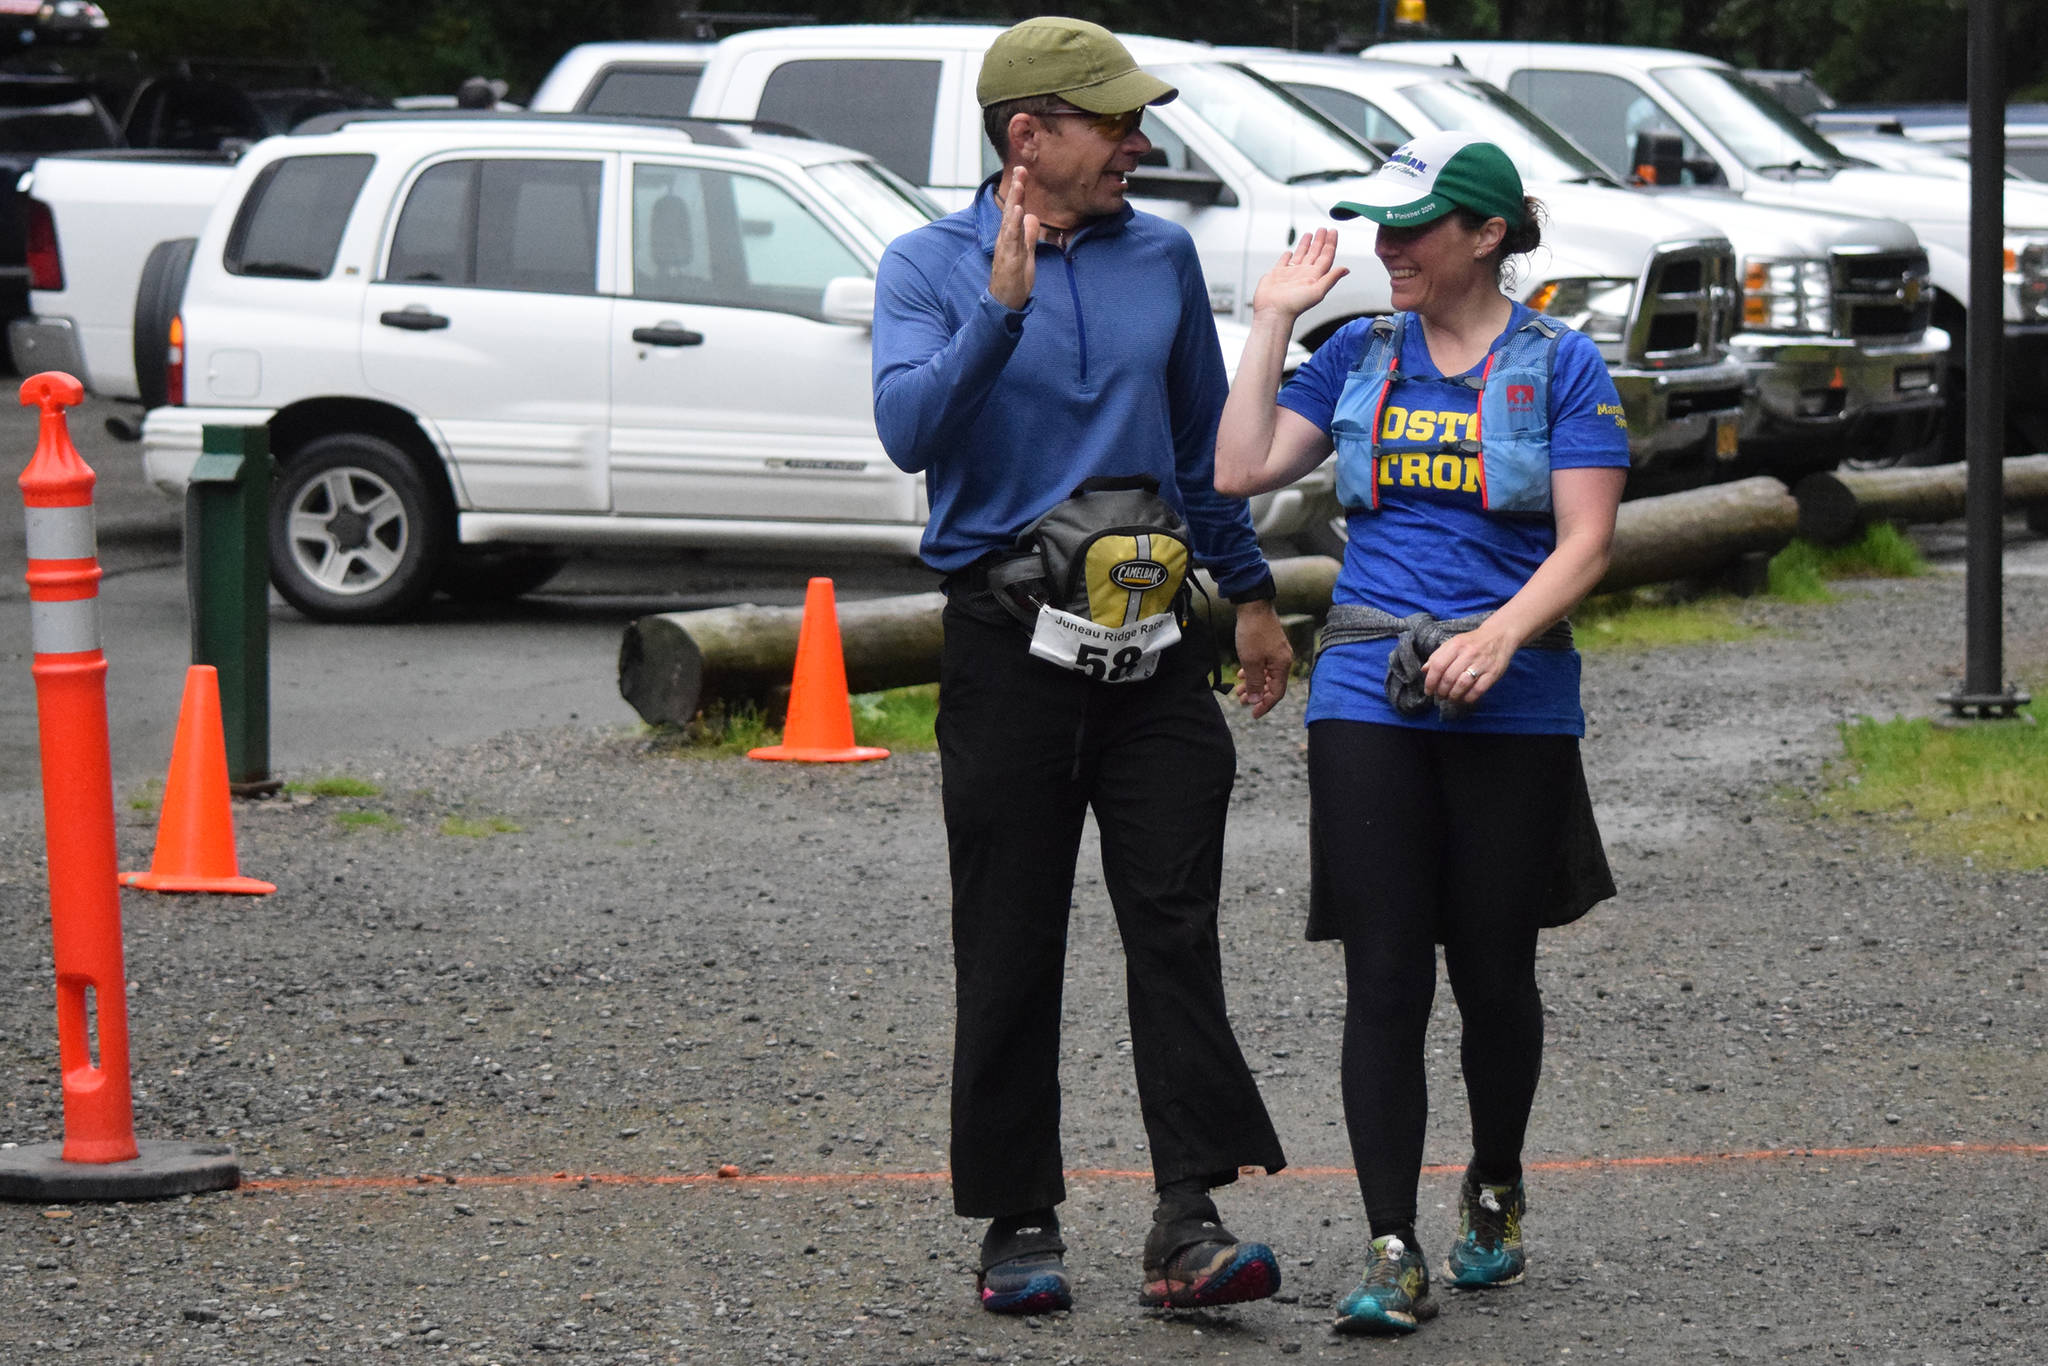 Mike Allen, left, and Kimberly Campbell congratulate one another after crossing the finish line of the Juneau Ridge Race at Cope Park on Saturday, July 20, 2019. Over 60 runners participated in the 15-mile mountain running race that featured approximately 5,000 feet of elevation gain. (Nolin Ainsworth | Juneau Empire)